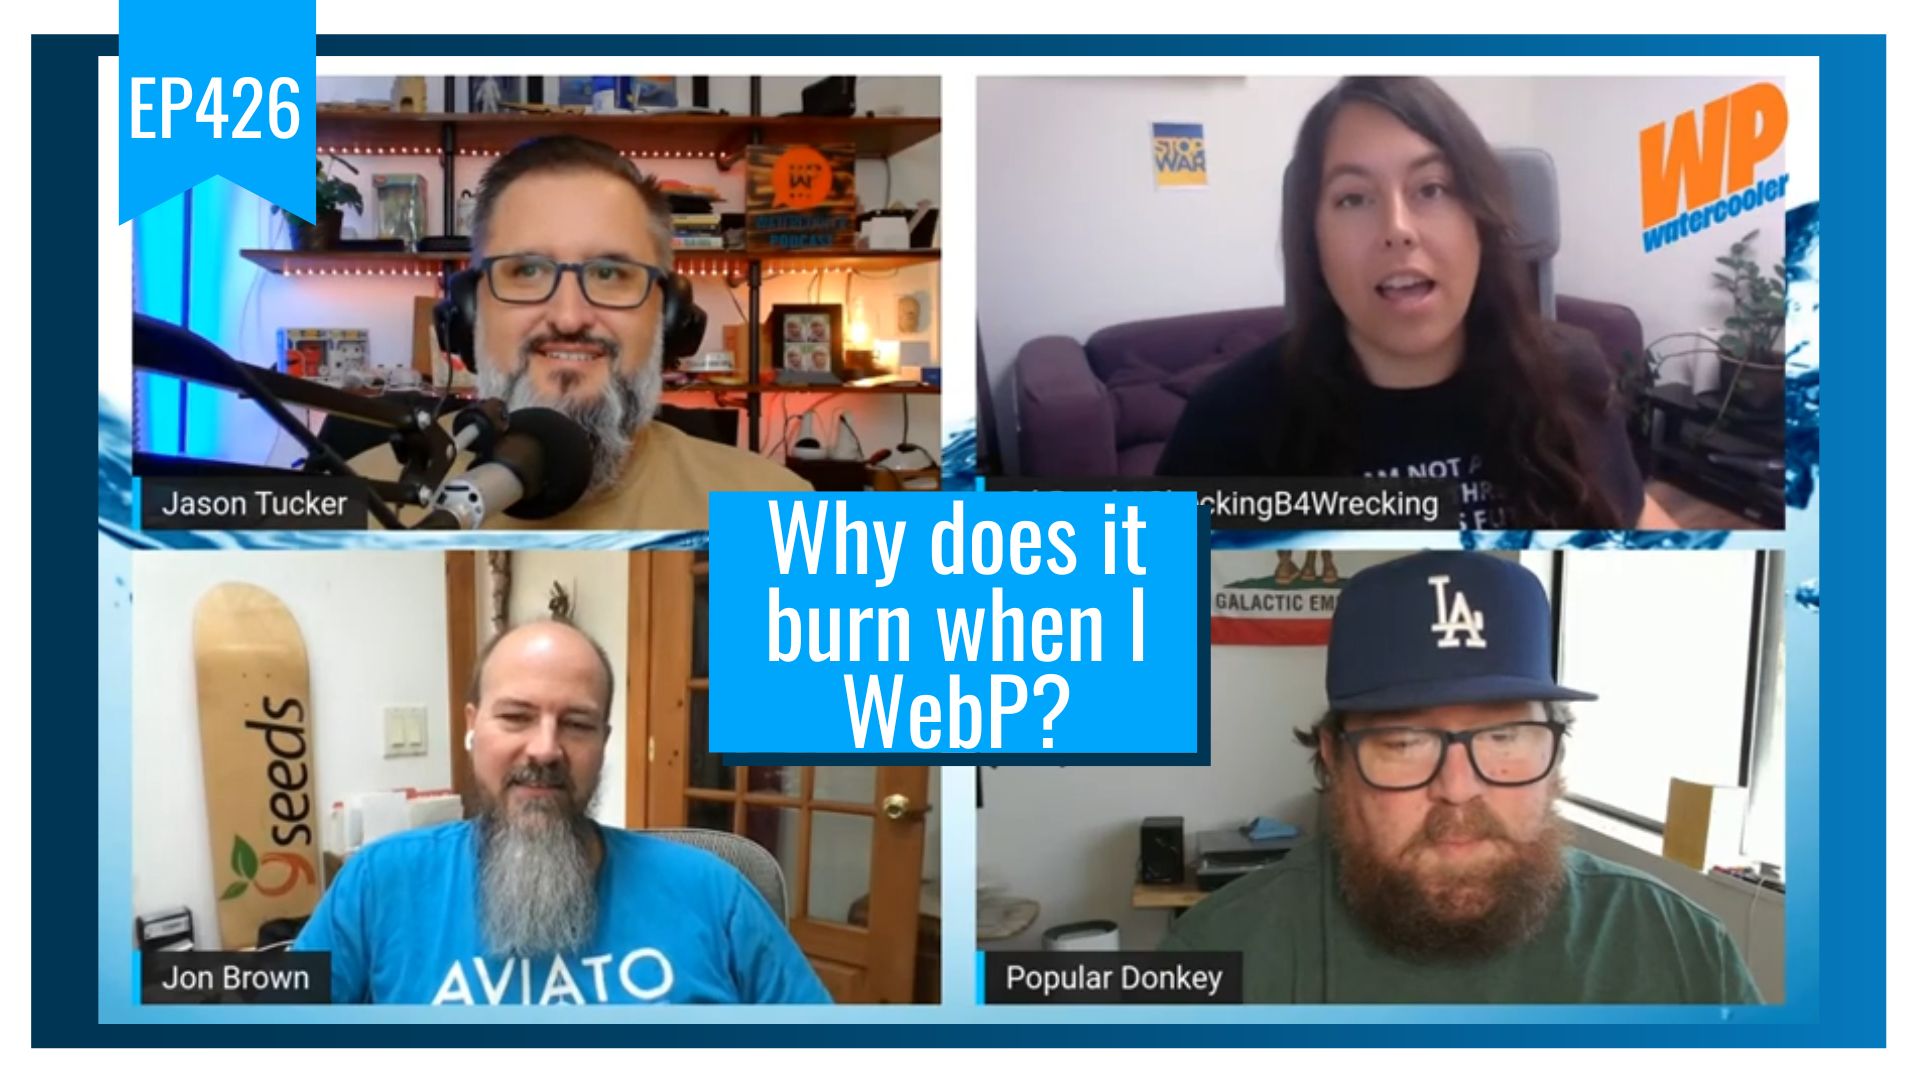 EP426 - Why does it burn when I WebP?